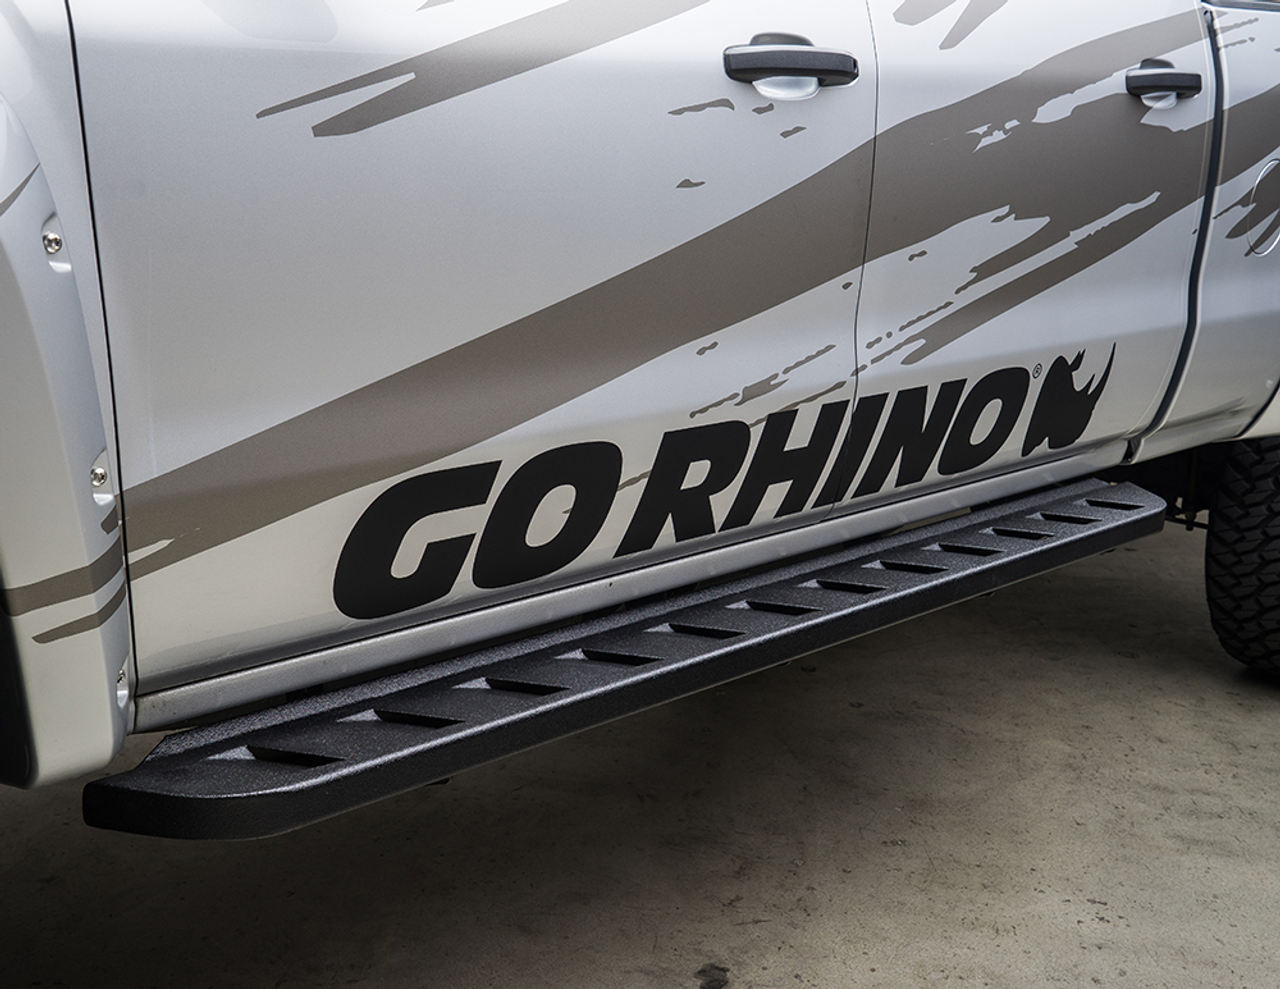 Go Rhino 6340588020T Chevrolet, Silverado 2500HD, 3500HD, 2015 - 2019, RB10 Running boards - Complete Kit: 2 pair RB10 Drop Steps, Galvanized Steel, Protective Bedliner coating, 630080T RB10 + 6940475 RB Brackets + (2) 69420000T Drop Steps